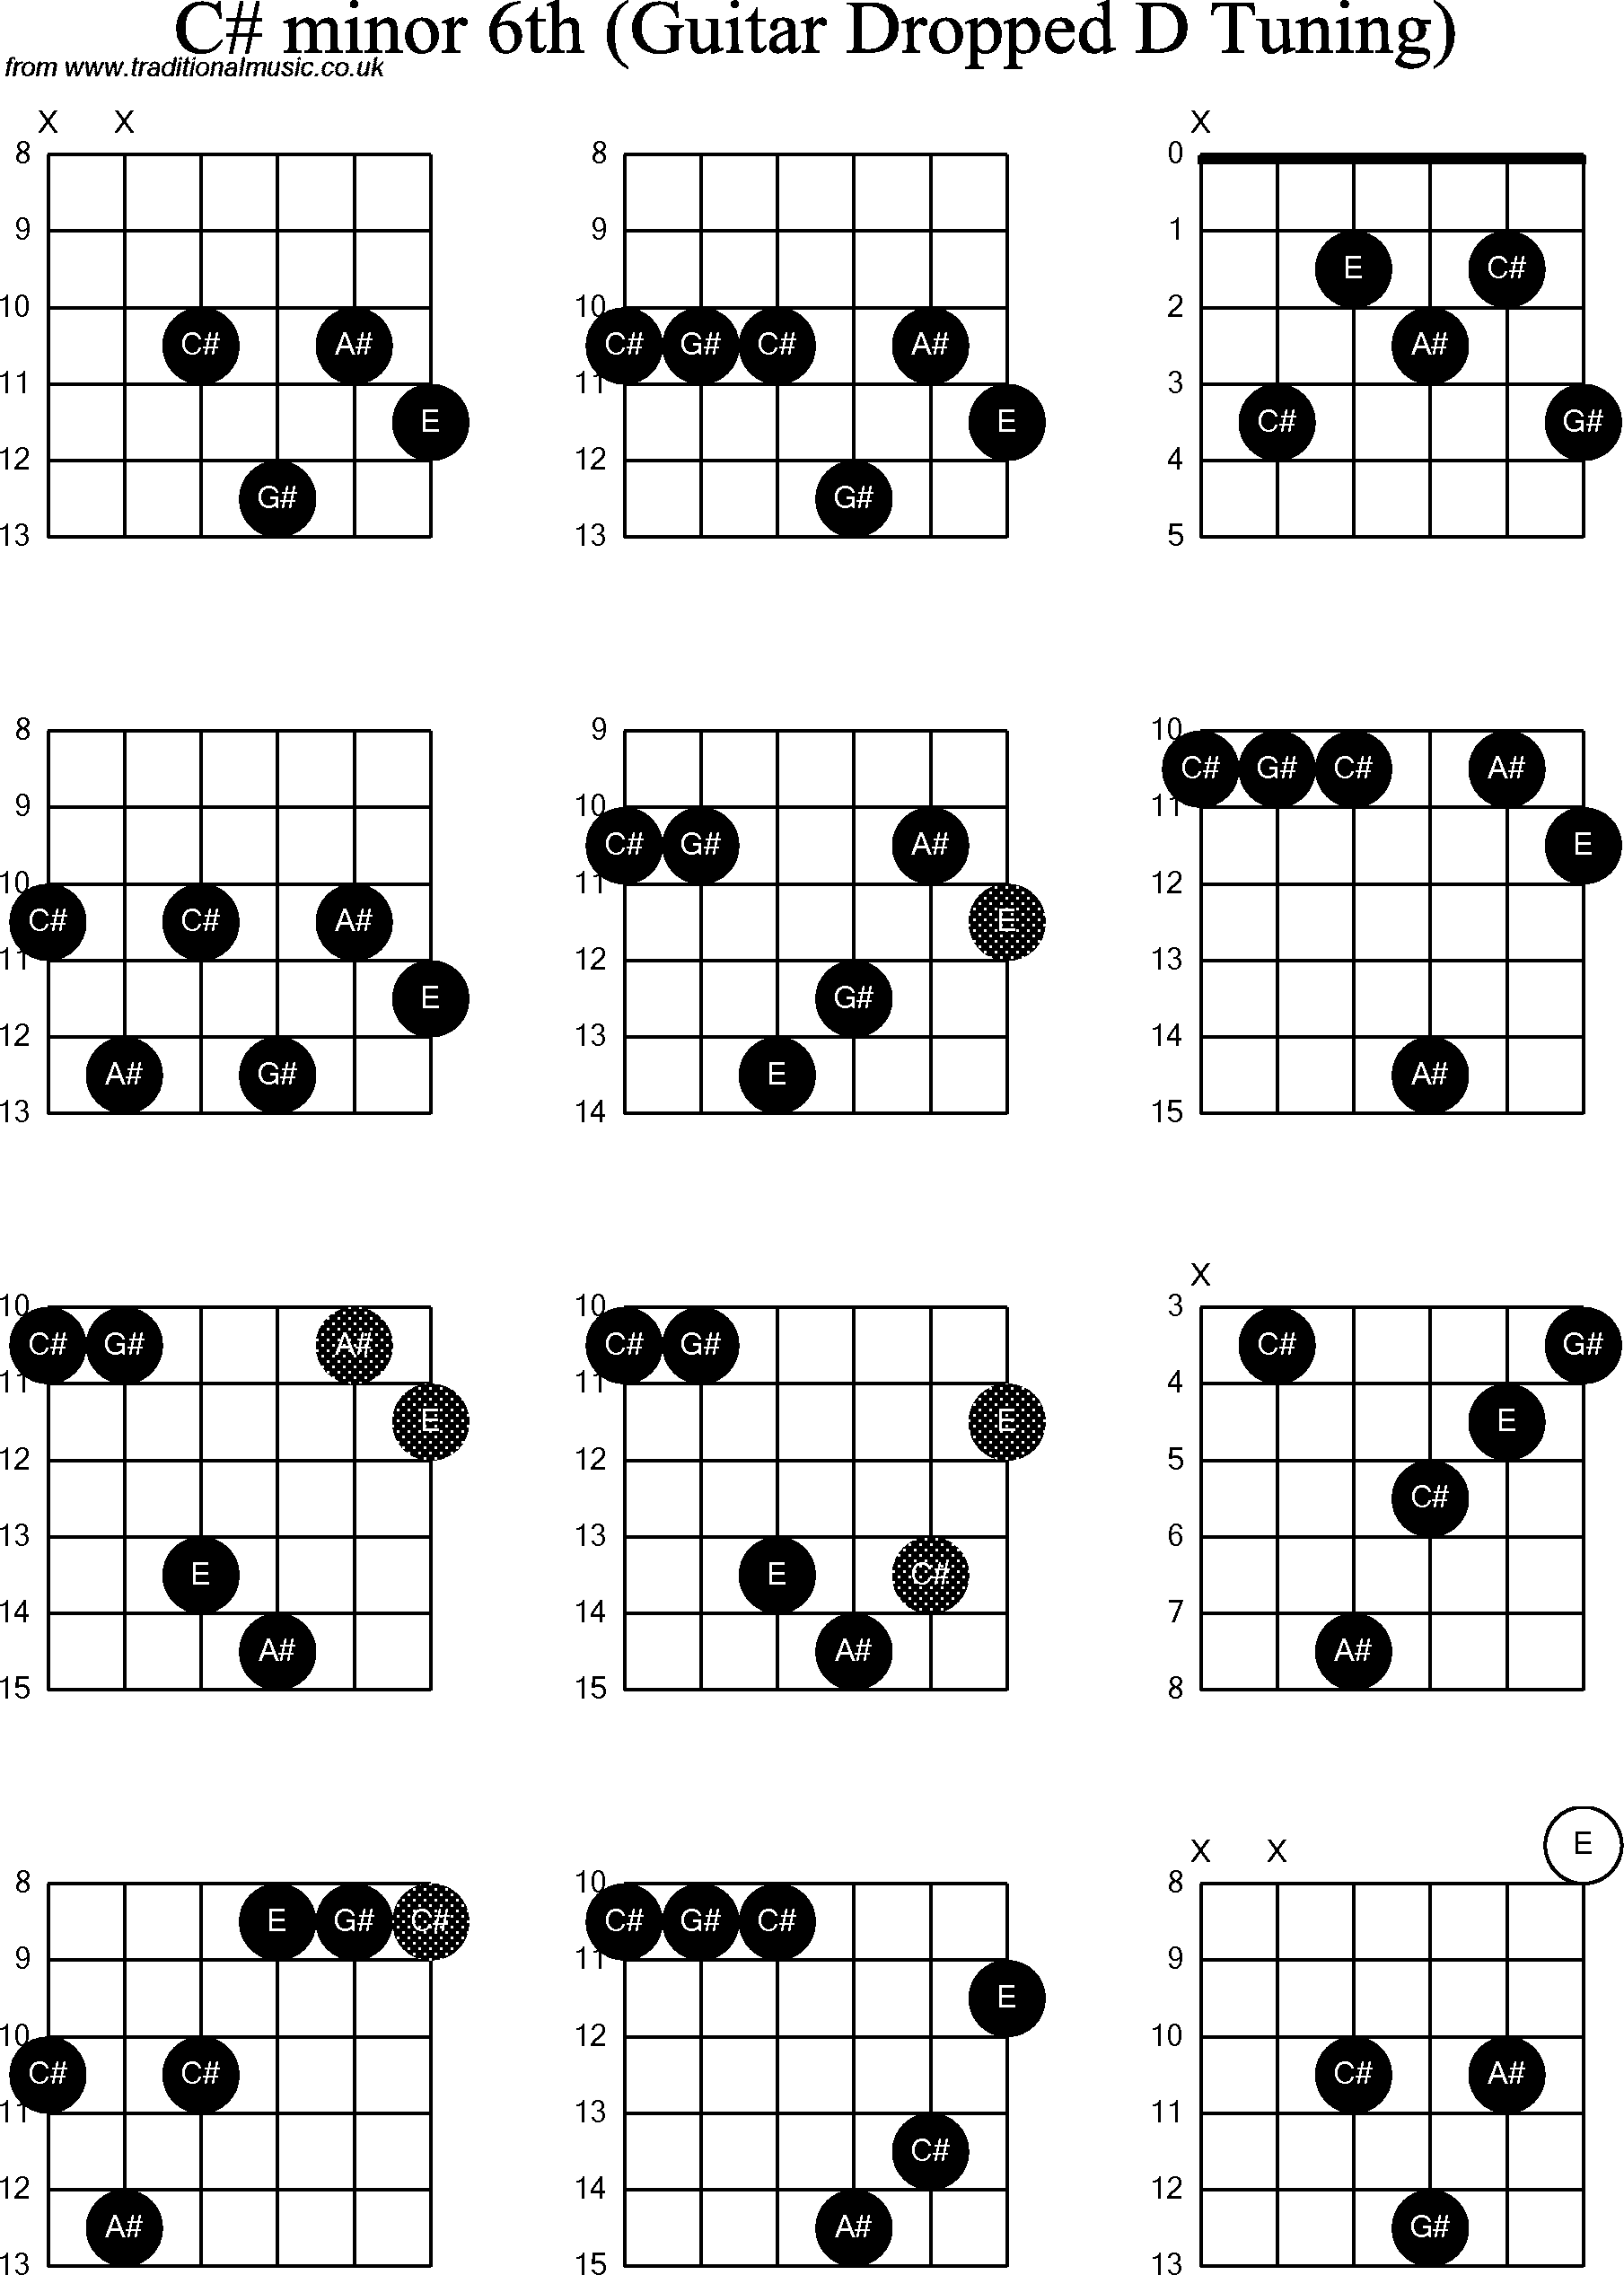 Chord Diagrams For Dropped D Guitar Dadgbe   C Sharp Minor6th